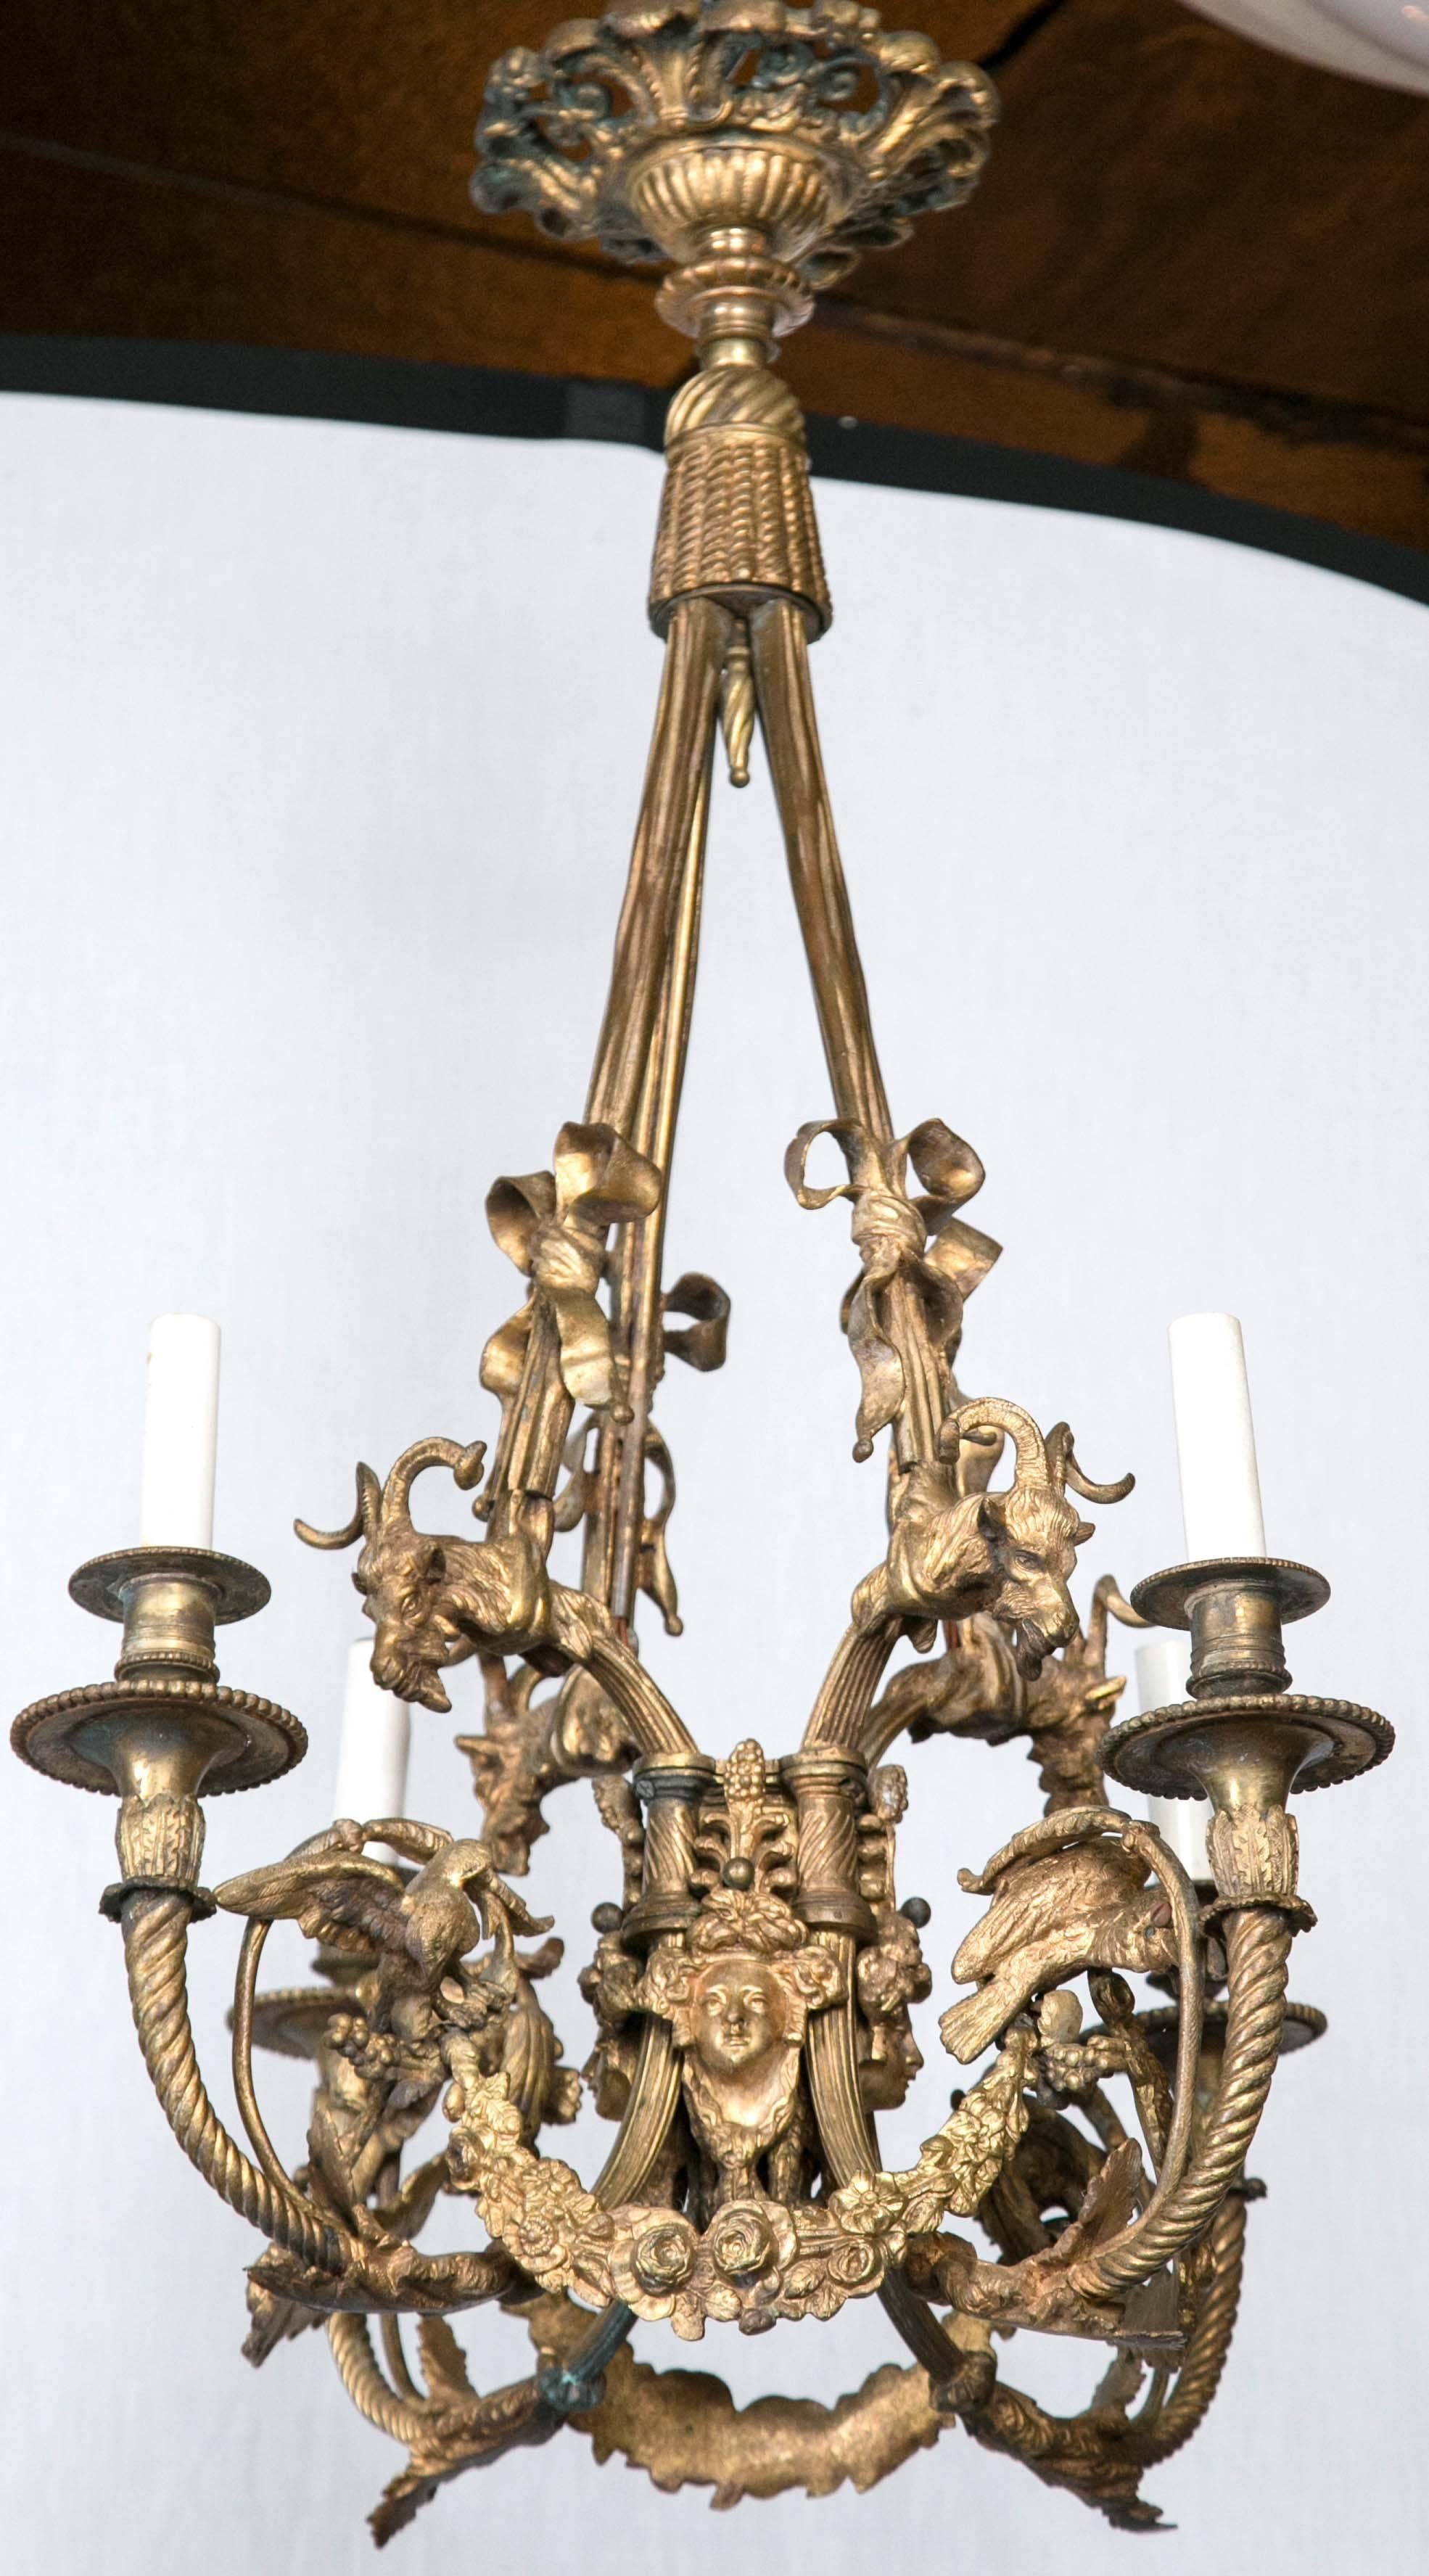 The top a medallion form ceiling mount. Above a tassel form to which are connected four suspending arms, each decorated with a bow, terminating with the top of the candle arms with goat heads. The arms swoop down and up, and are twisted. Between